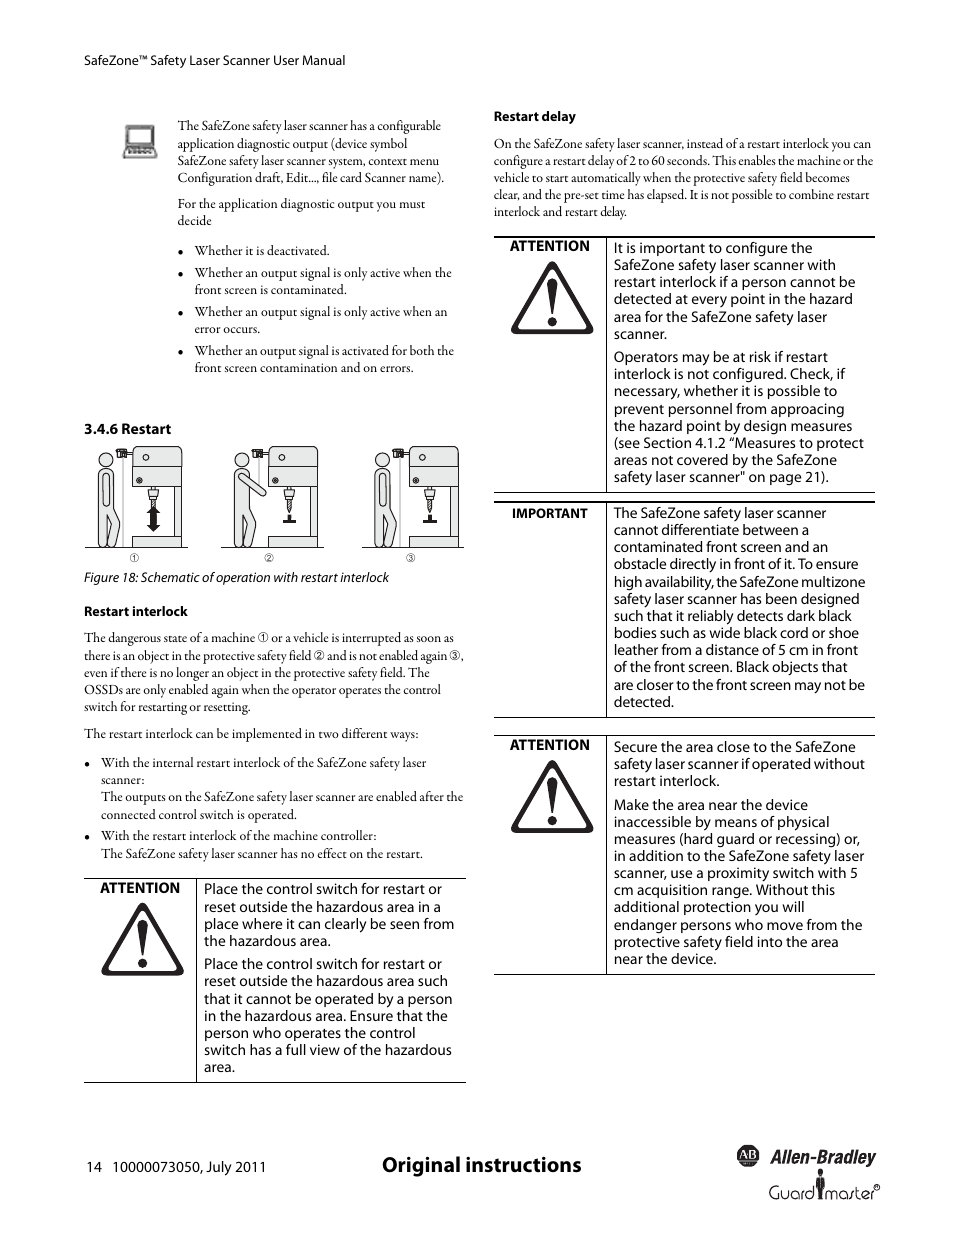 Original instructions | Rockwell Automation 442L SafeZone Singlezone & Multizone Safety Laser Scanner User Manual | Page 16 / 60